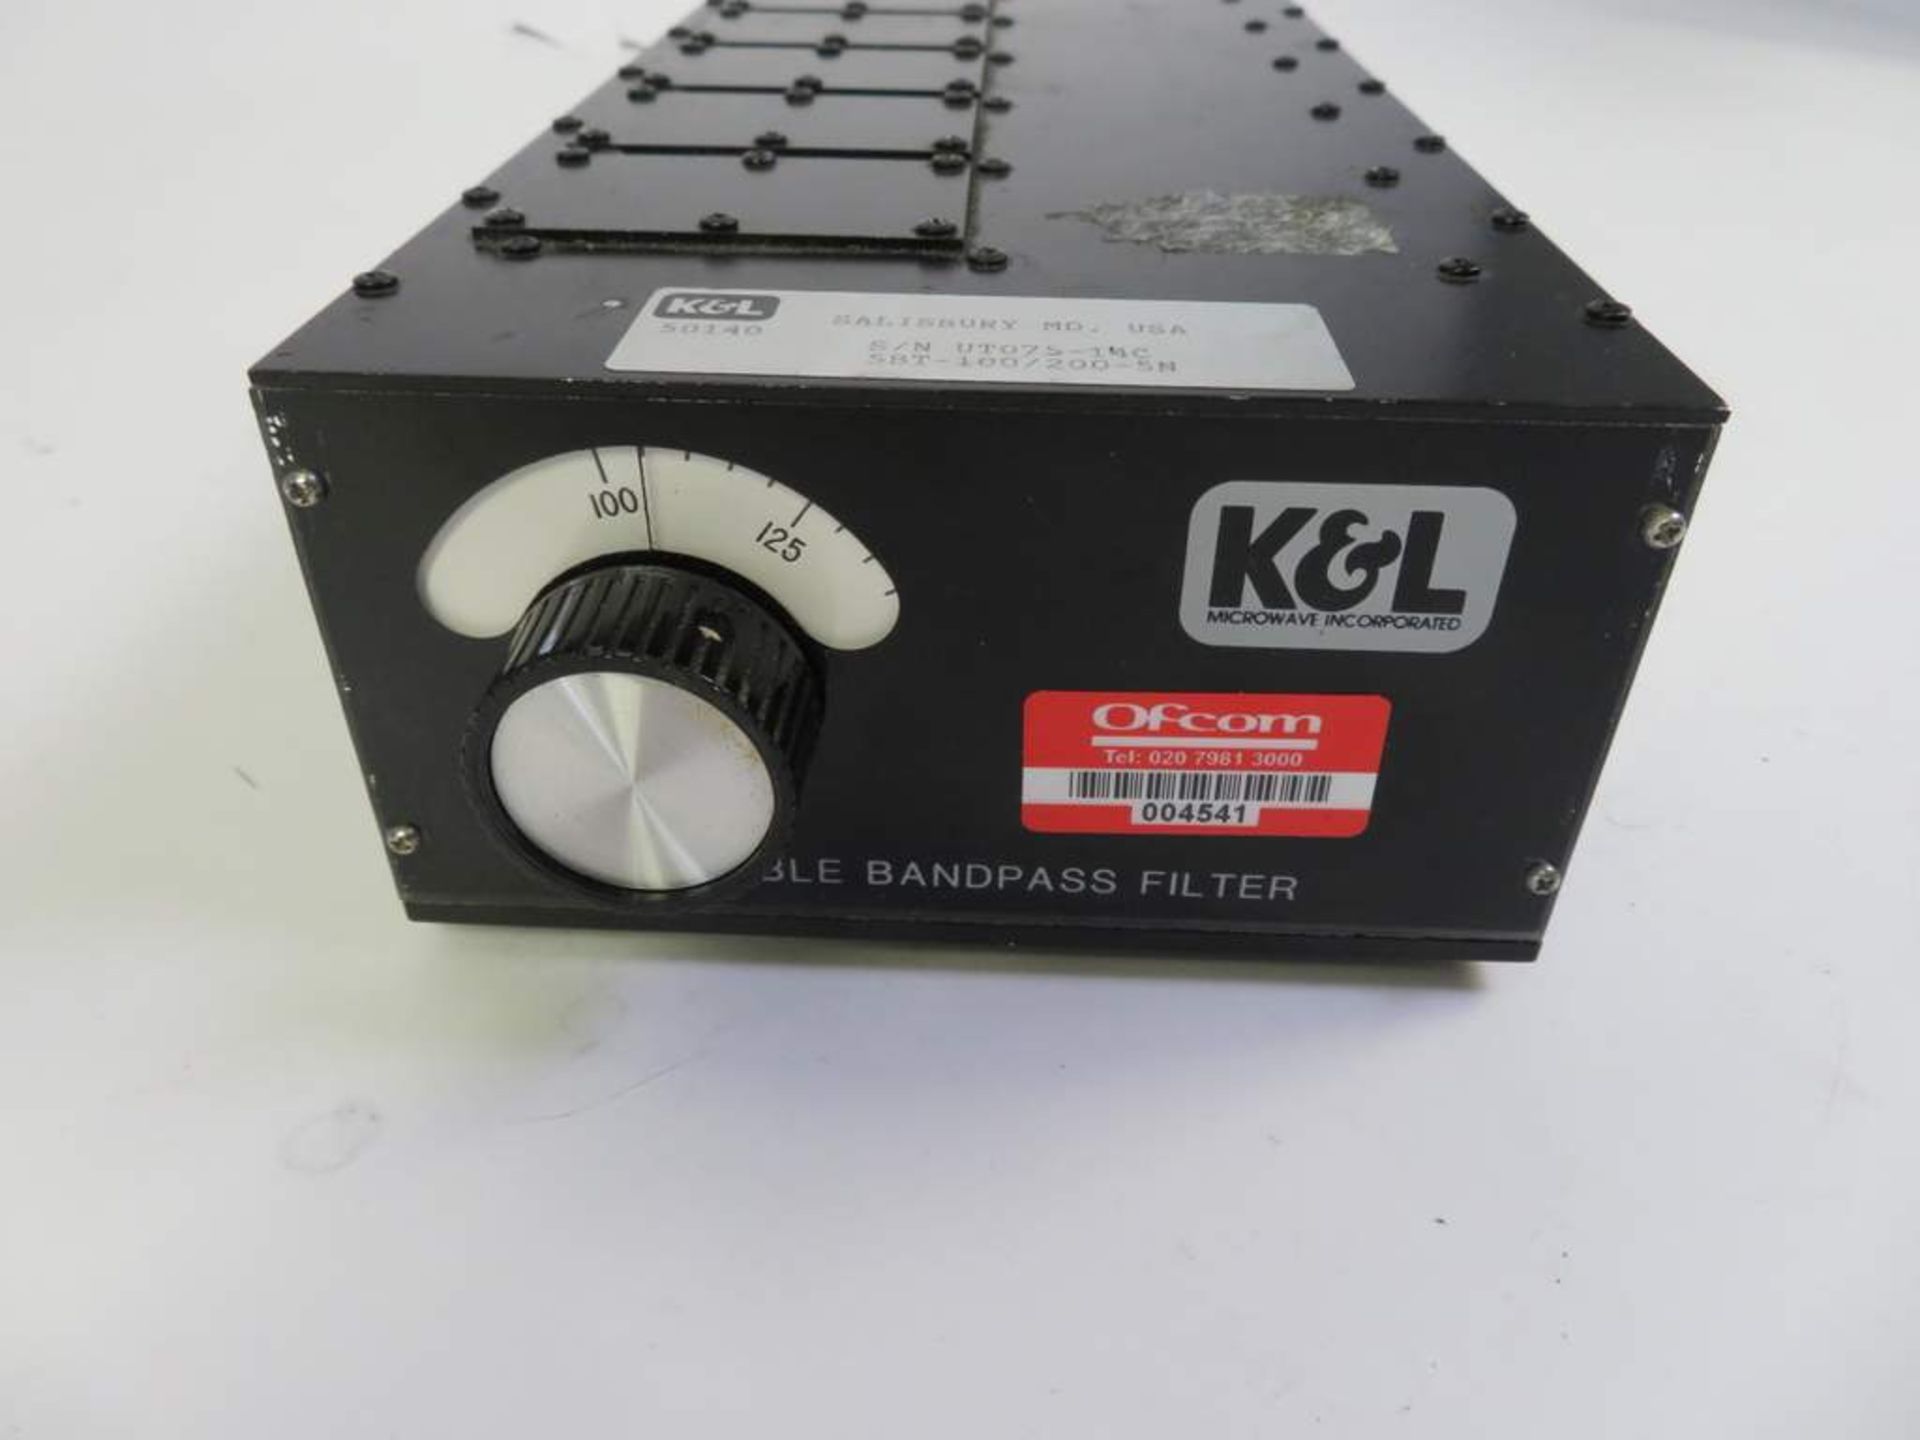 K&L 5BT-100/200-5N Tunable Bandpass Filter - Image 2 of 4